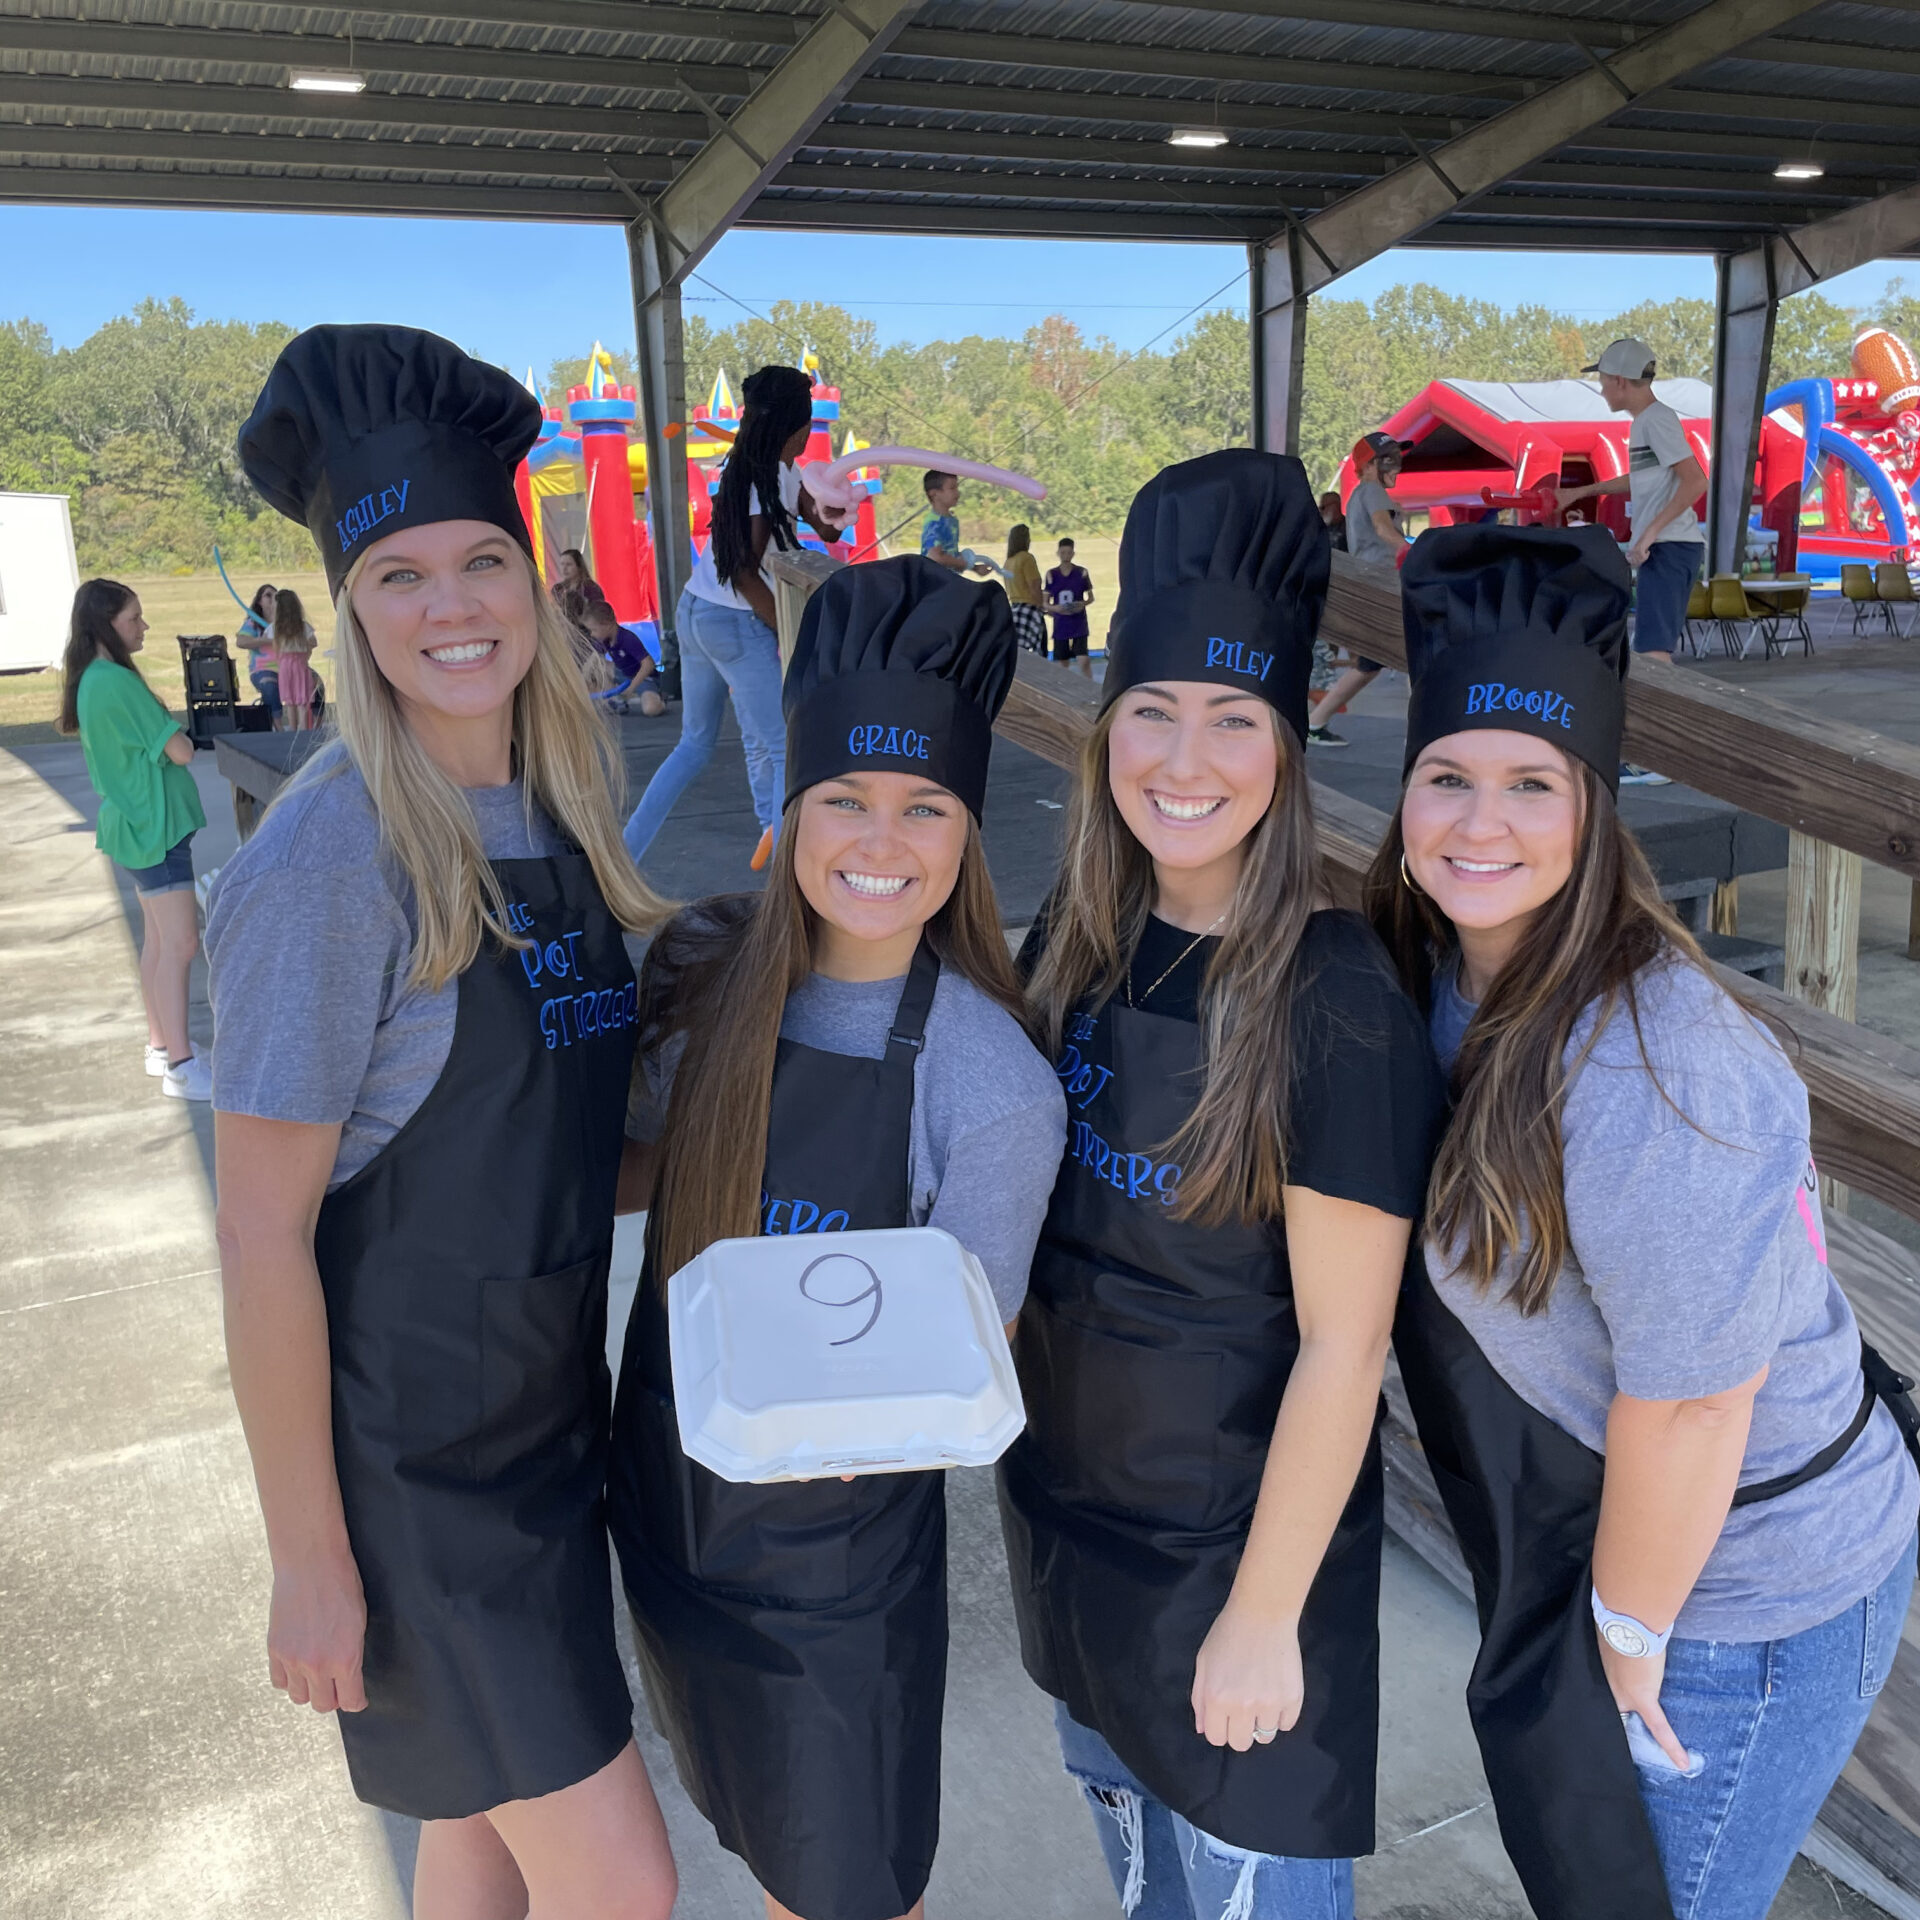 A group of Trade employees at a Cookoff